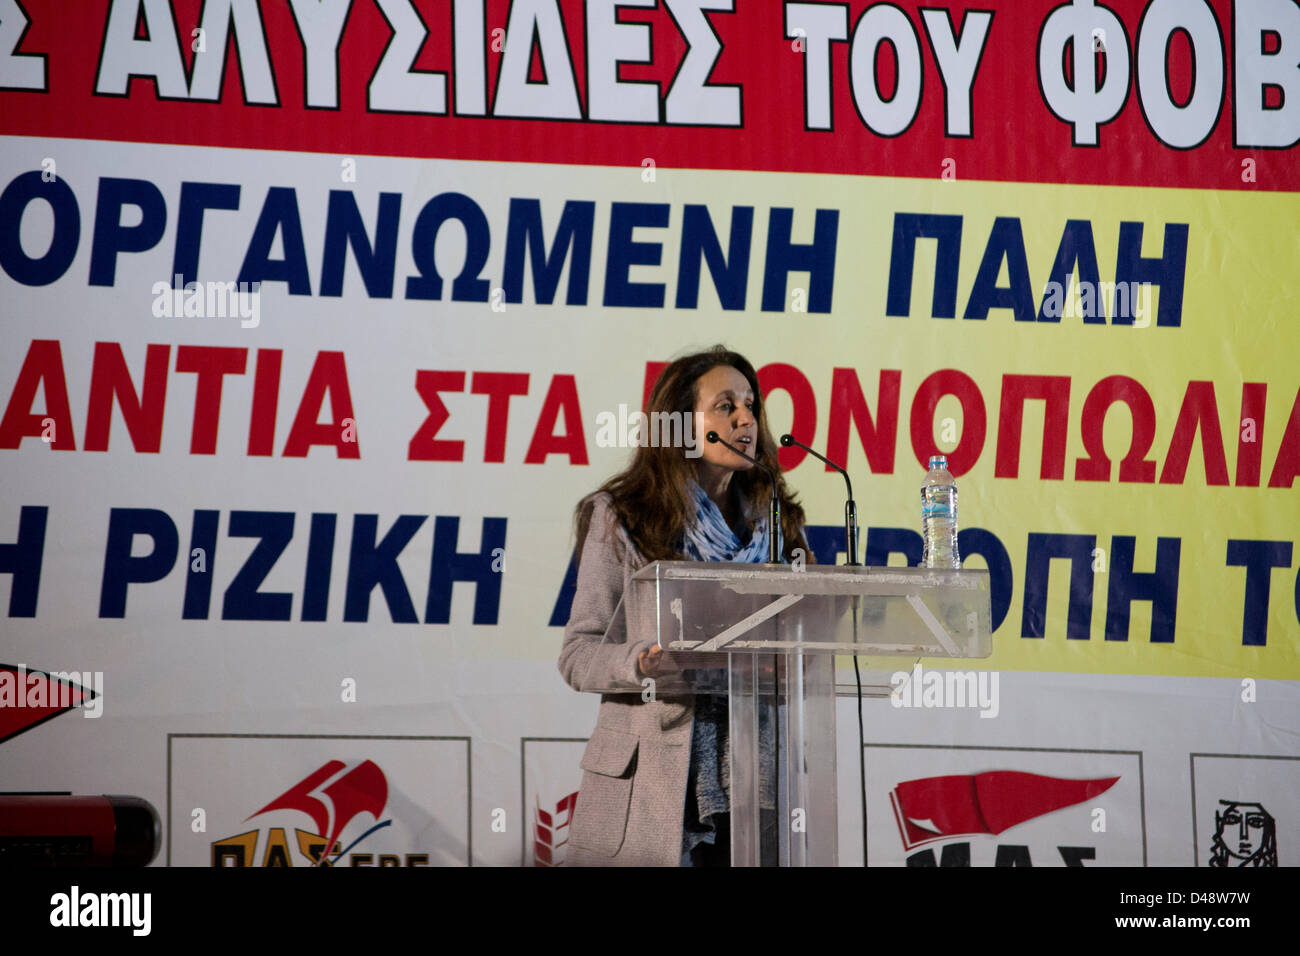 Athens, Greece, 8th March 2013. International women's day is celebrated in Athens with a demonstration against women's working rights abuse. Members and supporters of the Greek Communist Party held banners and shouted slogans against capitalism and government's policies. MP Mrs Mpalou addresses women. Credit:  Nikolas Georgiou / Alamy Live News Stock Photo